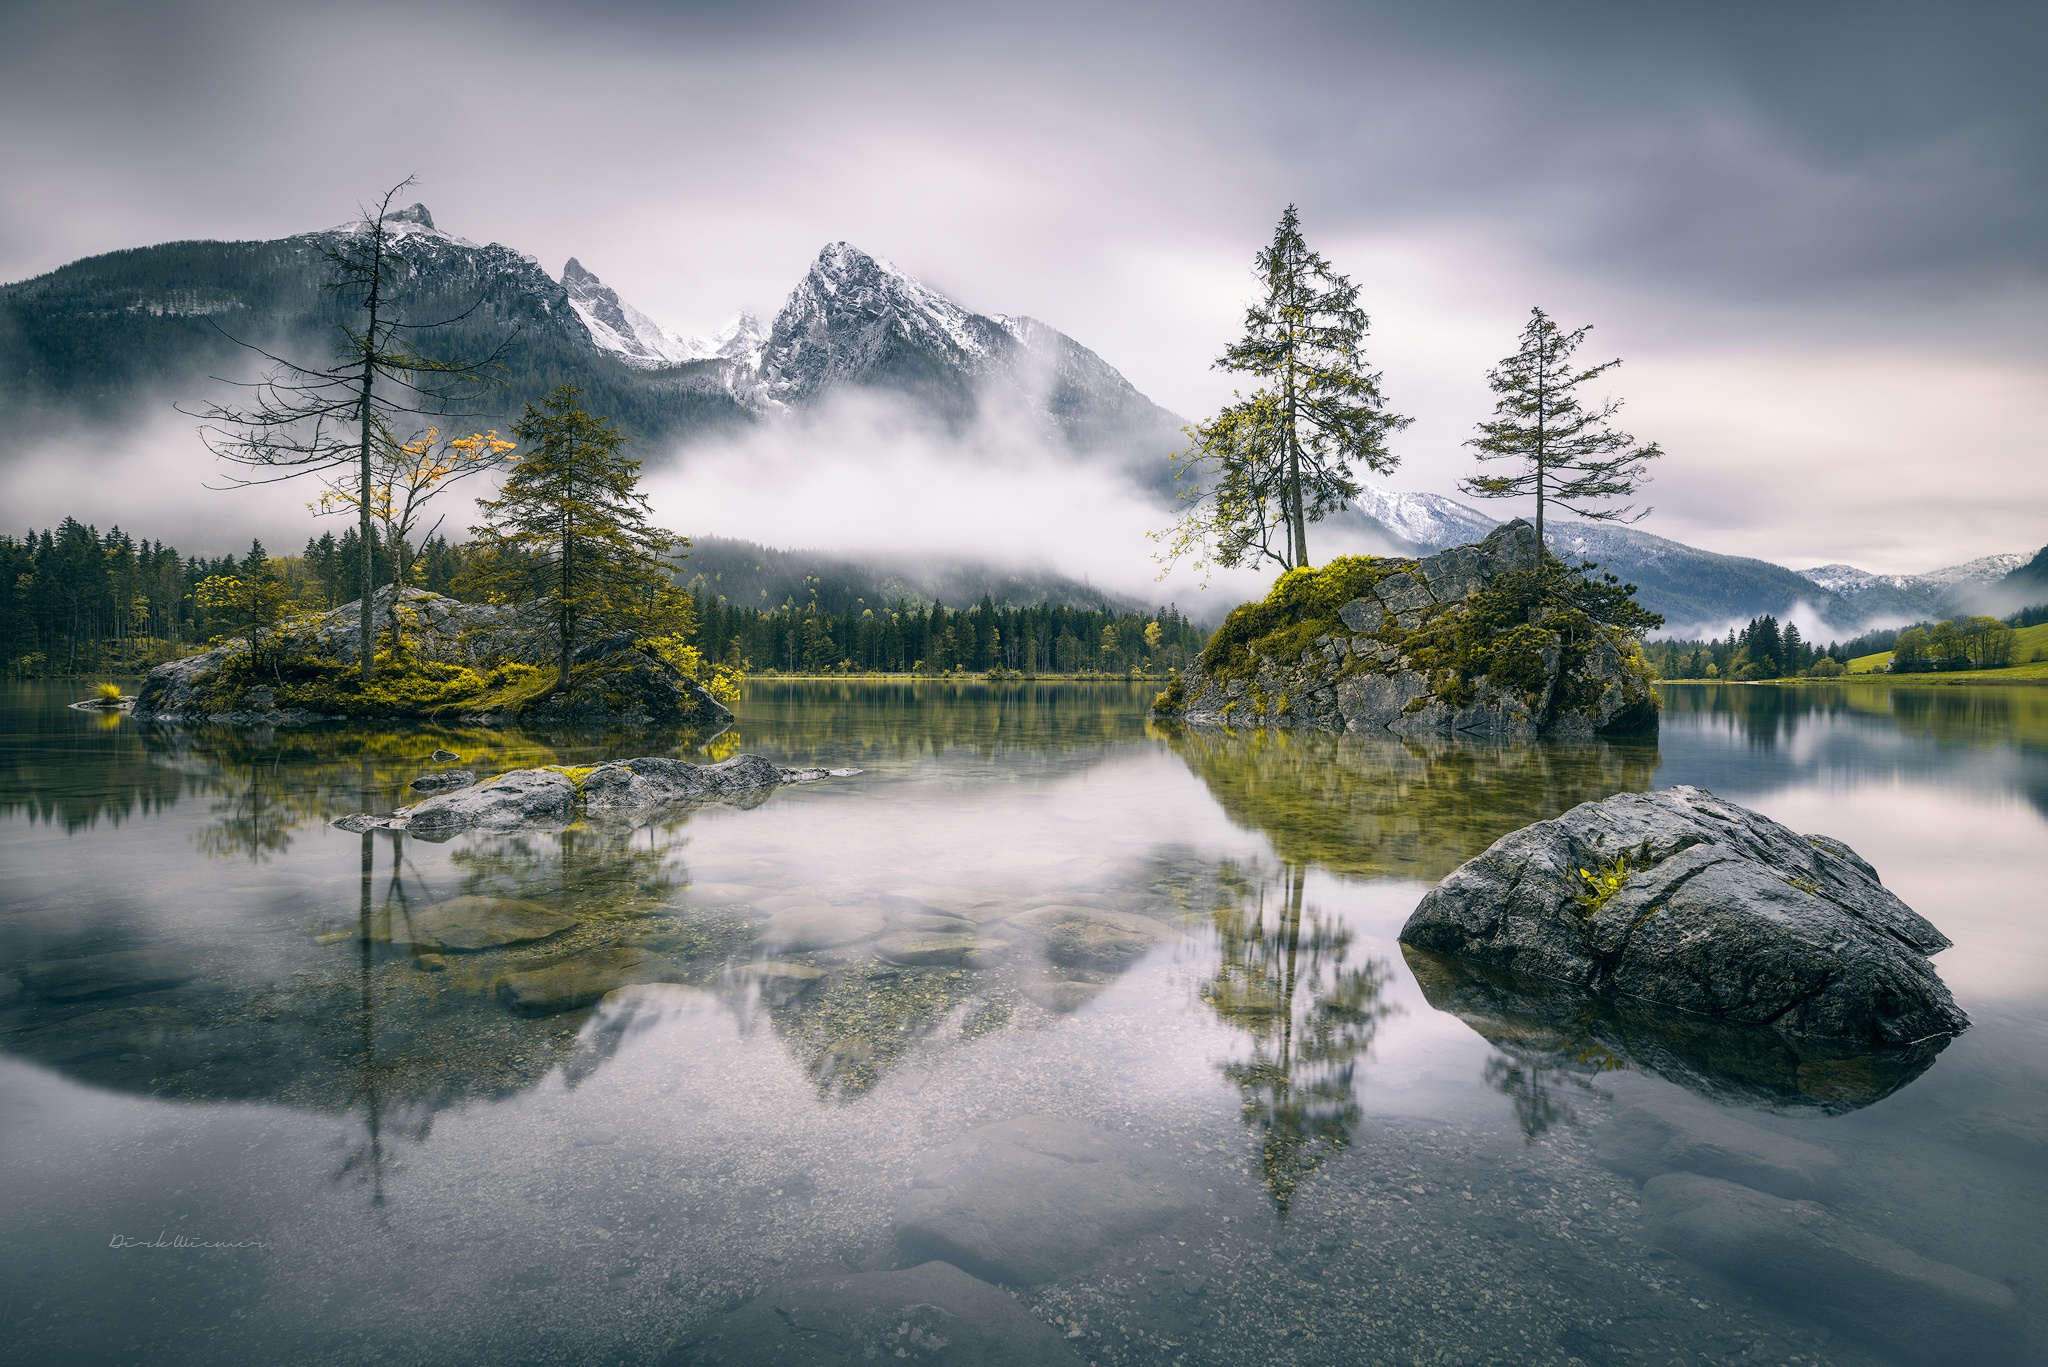 General 2048x1367 mountains reflection nature trees landscape water watermarked calm calm waters mist moss